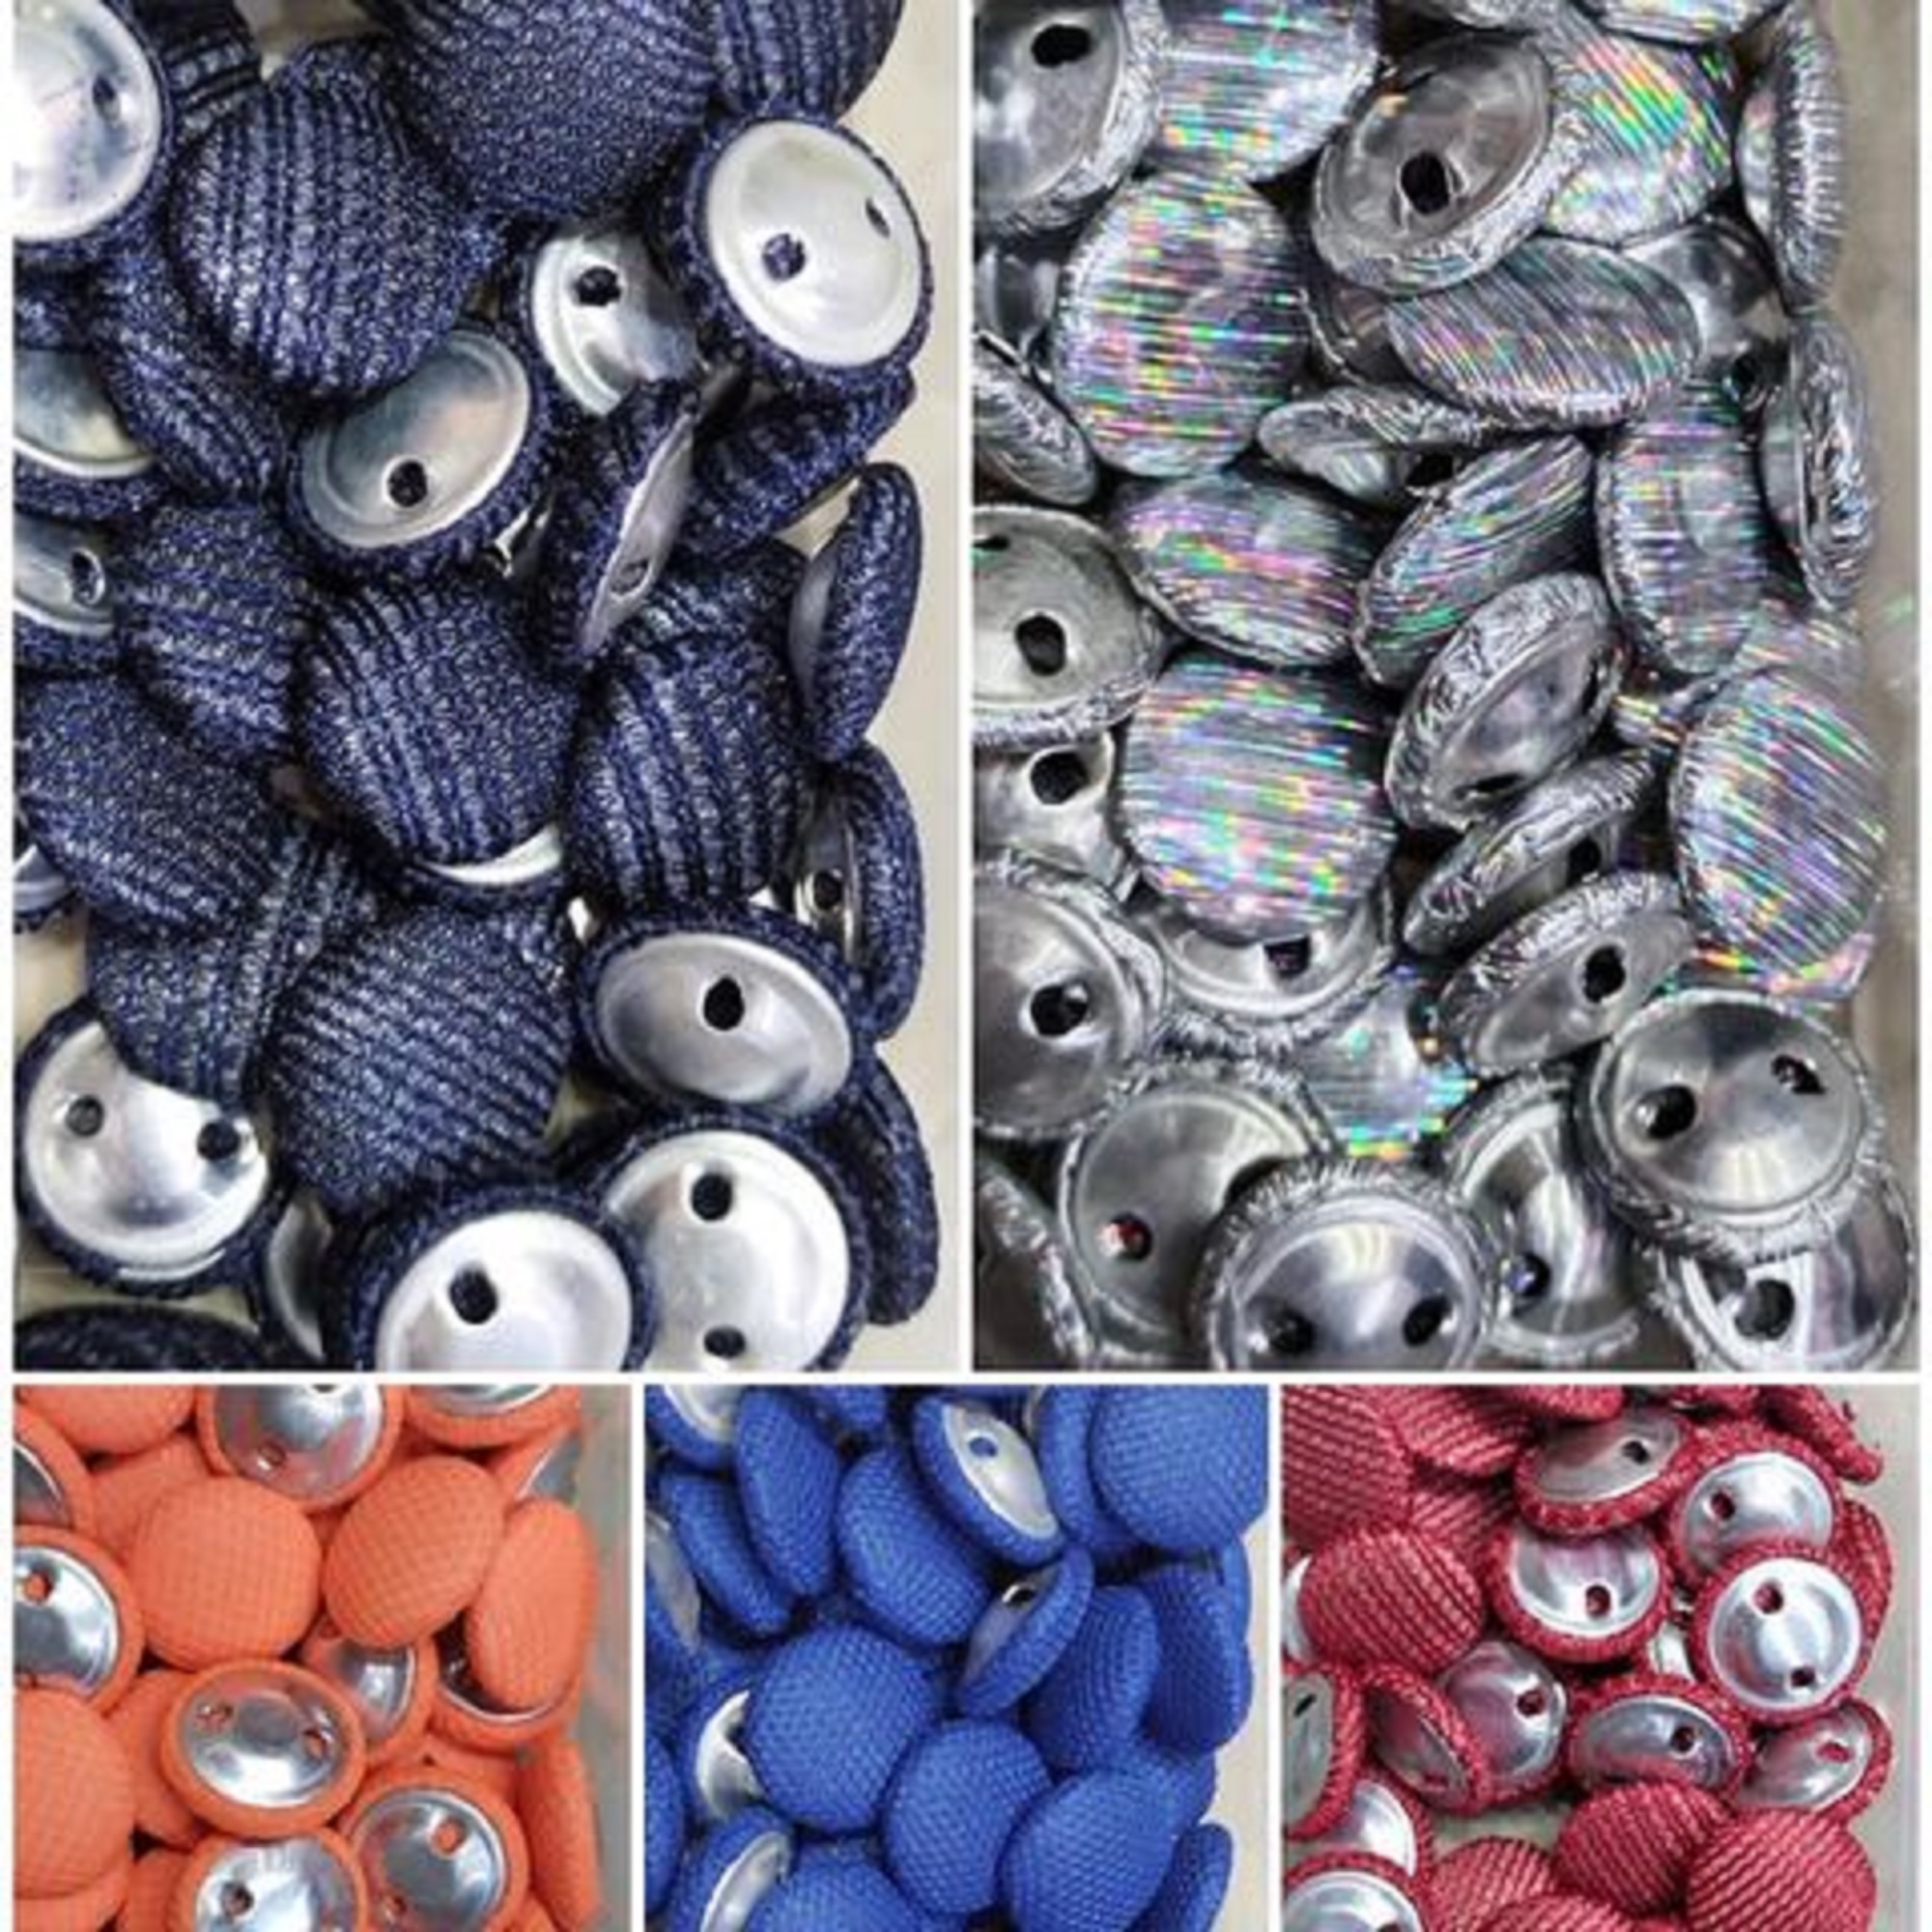 Easnea 20pcs Button With Cotton Fabric Covered Garment Buttons